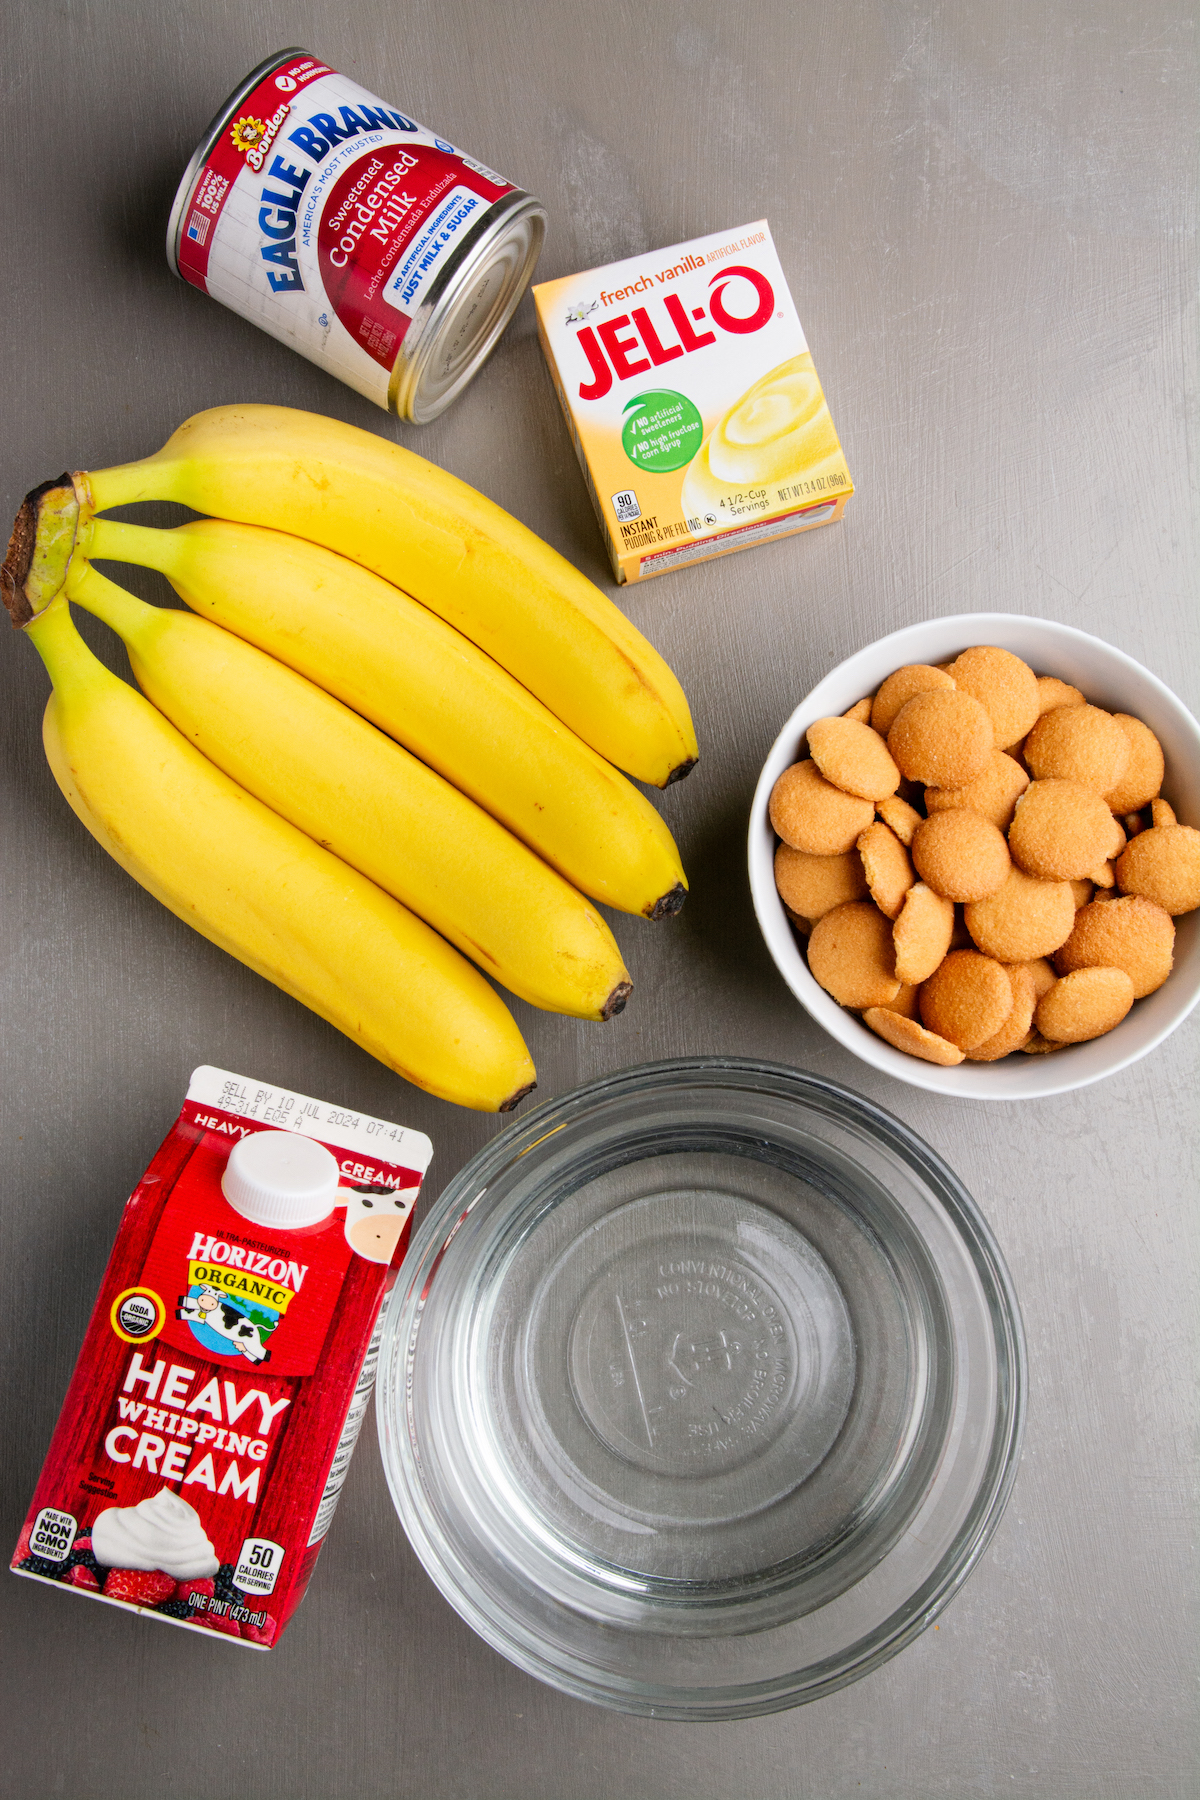 Ingredients for Magnolia Bakery's Banana Pudding. A bunch of bananas, a can of condensed milk, a box of instant French vanilla pudding, a bowl full of Nilla wafers, a bowl of cold water, and a small carton of heavy whipping cream.